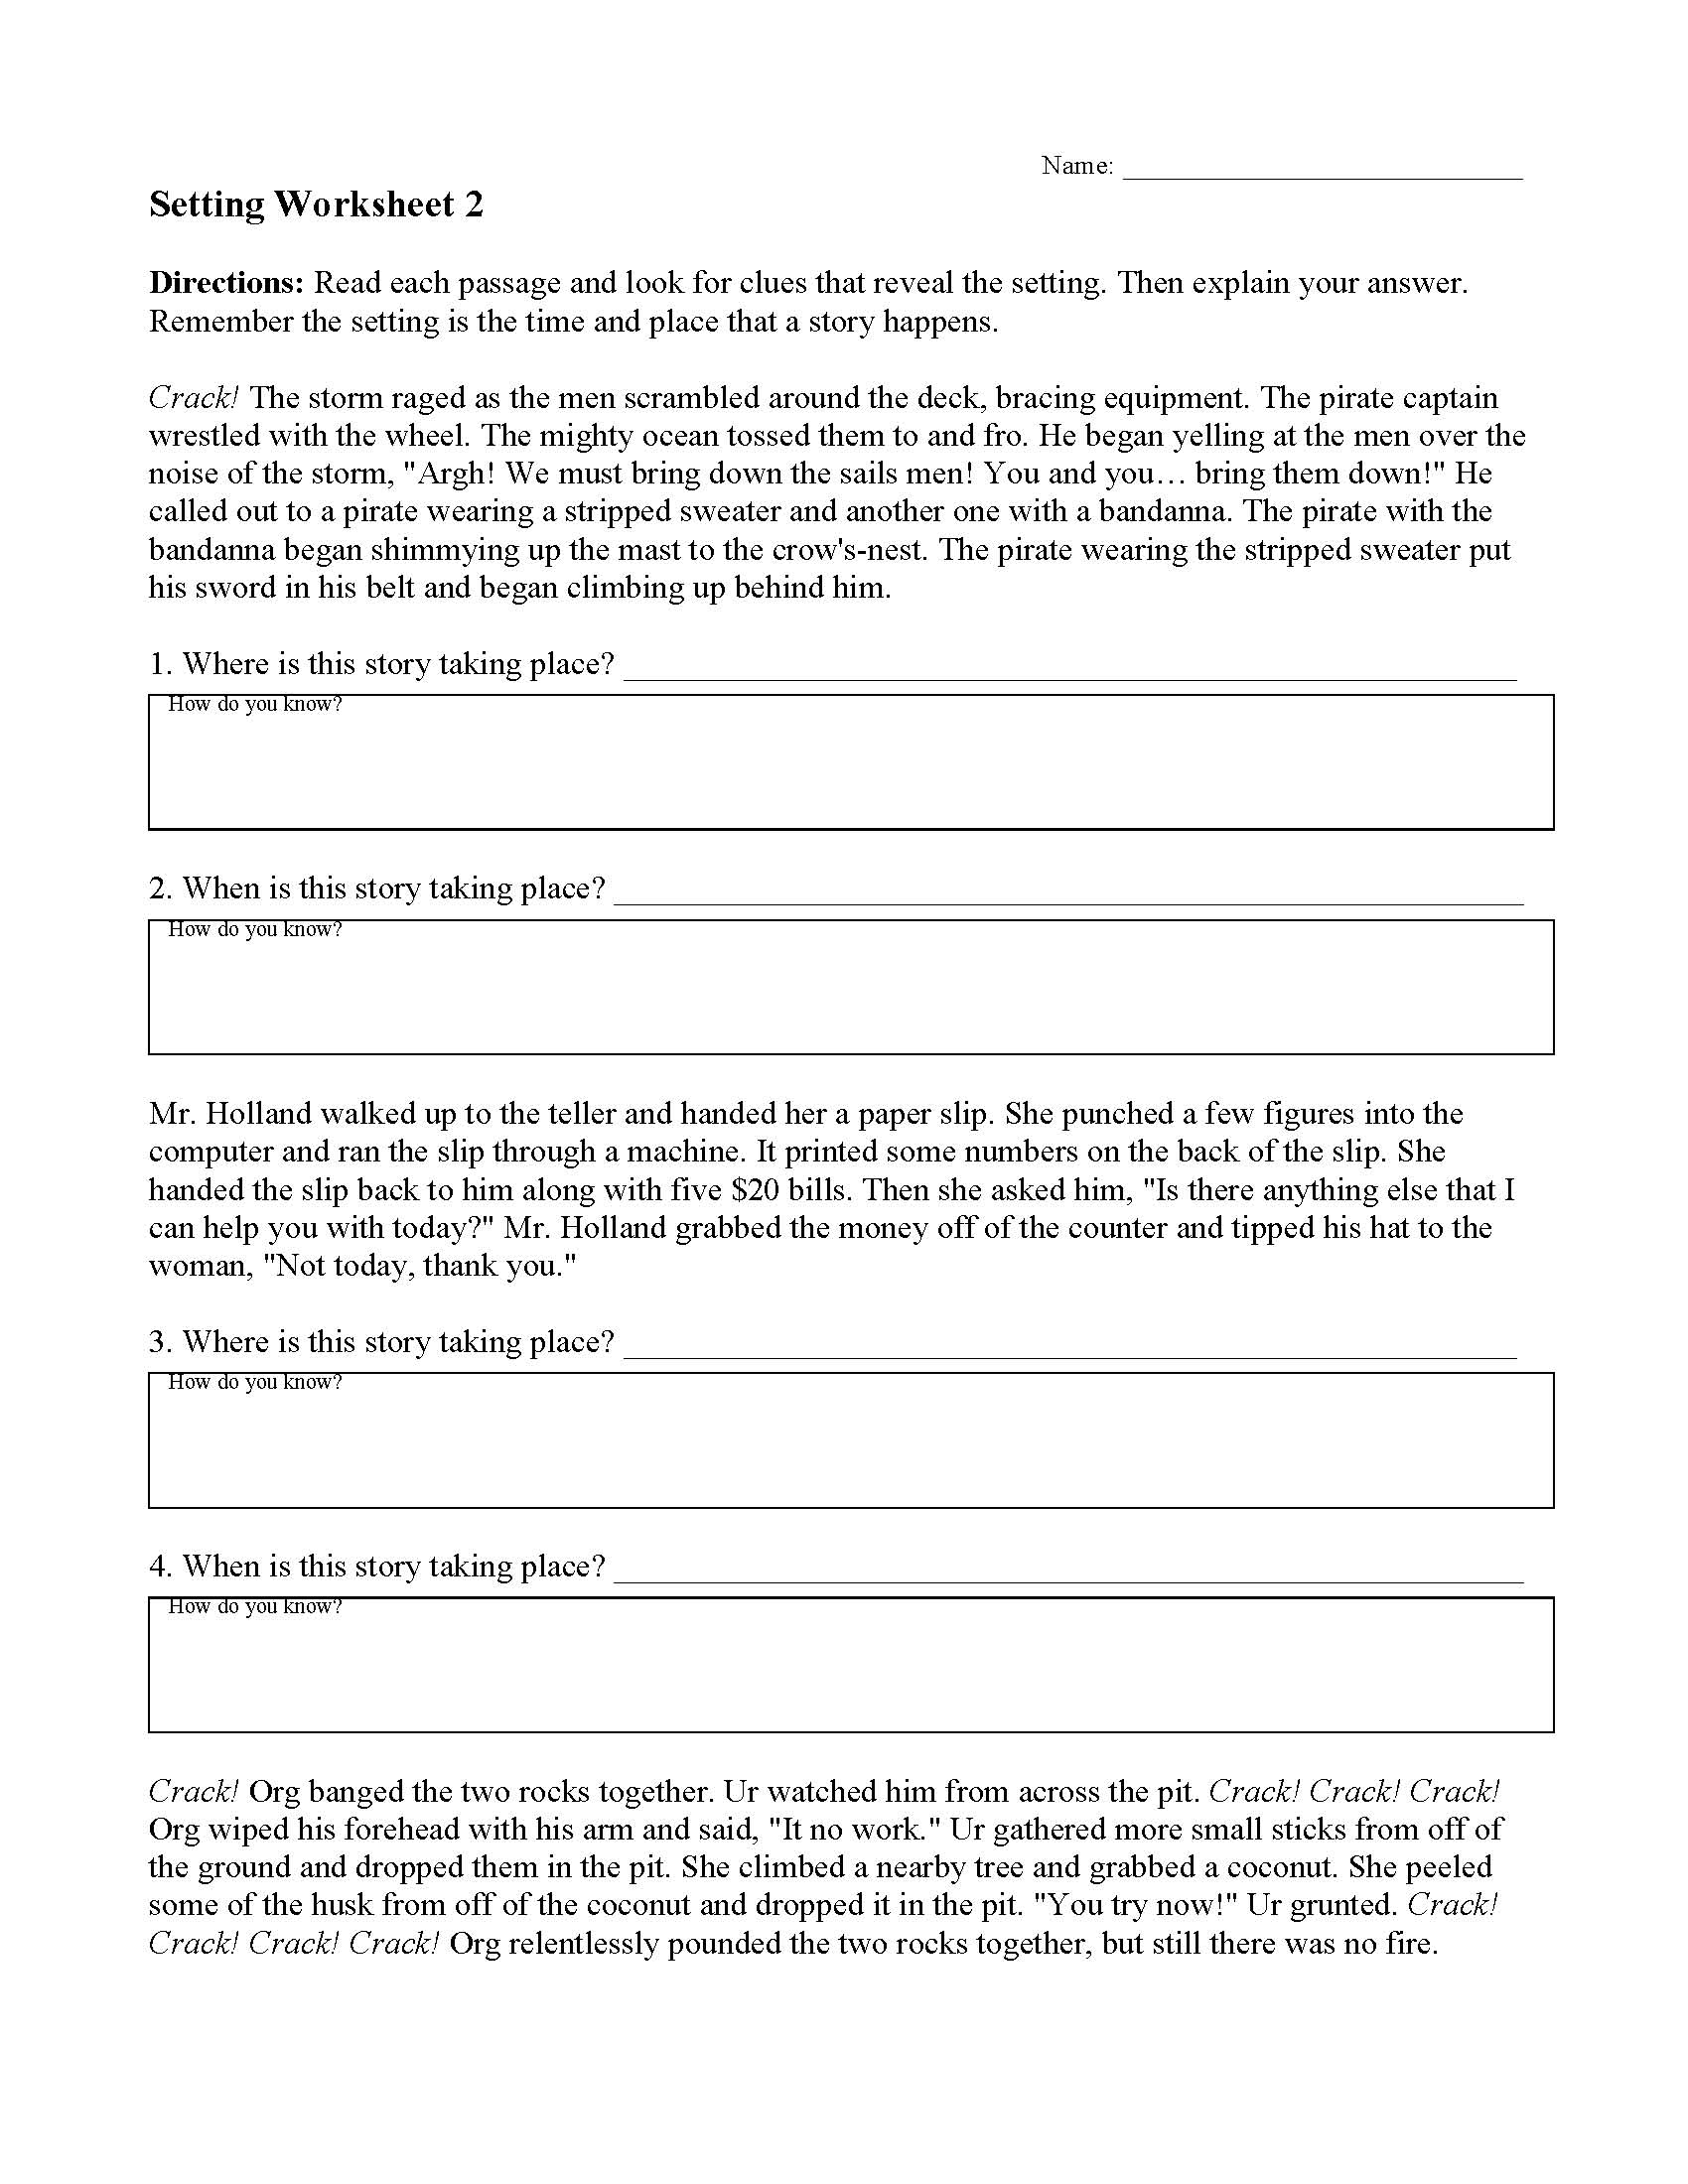 This is a preview image of Setting Worksheet 2. Click on it to enlarge it or view the source file.